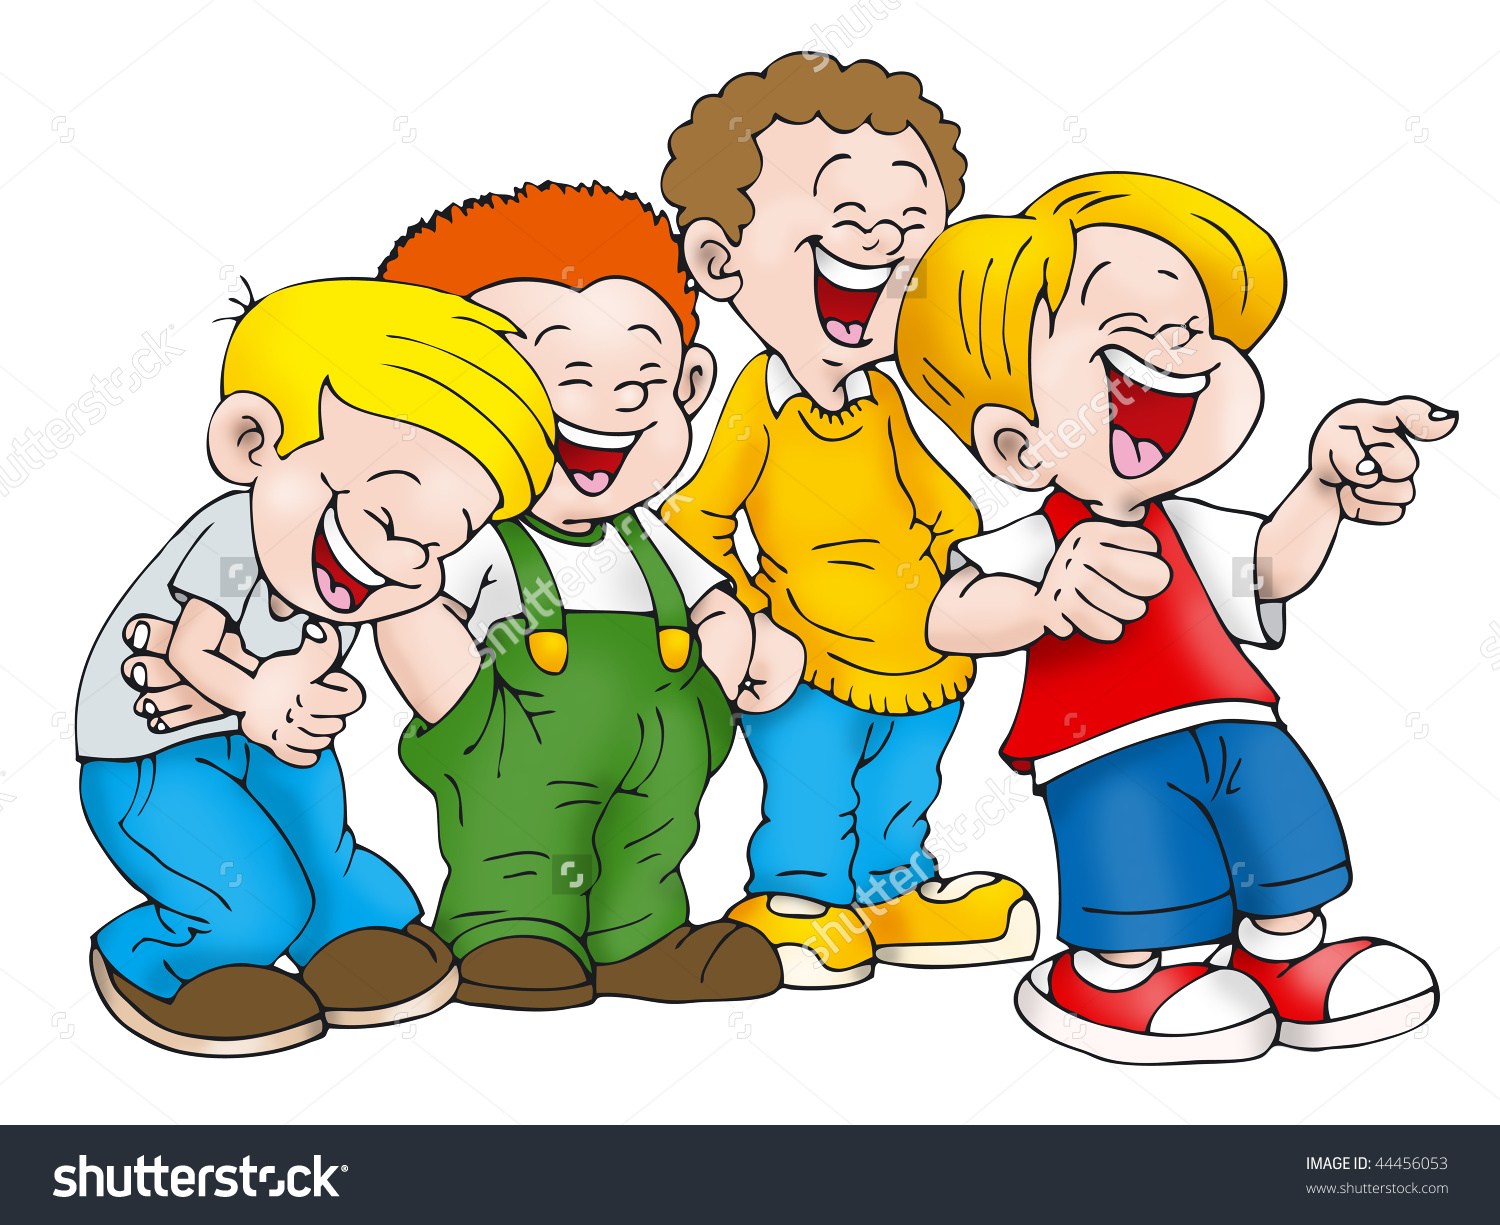 Free clipart of people laughing 5 » Clipart Portal.